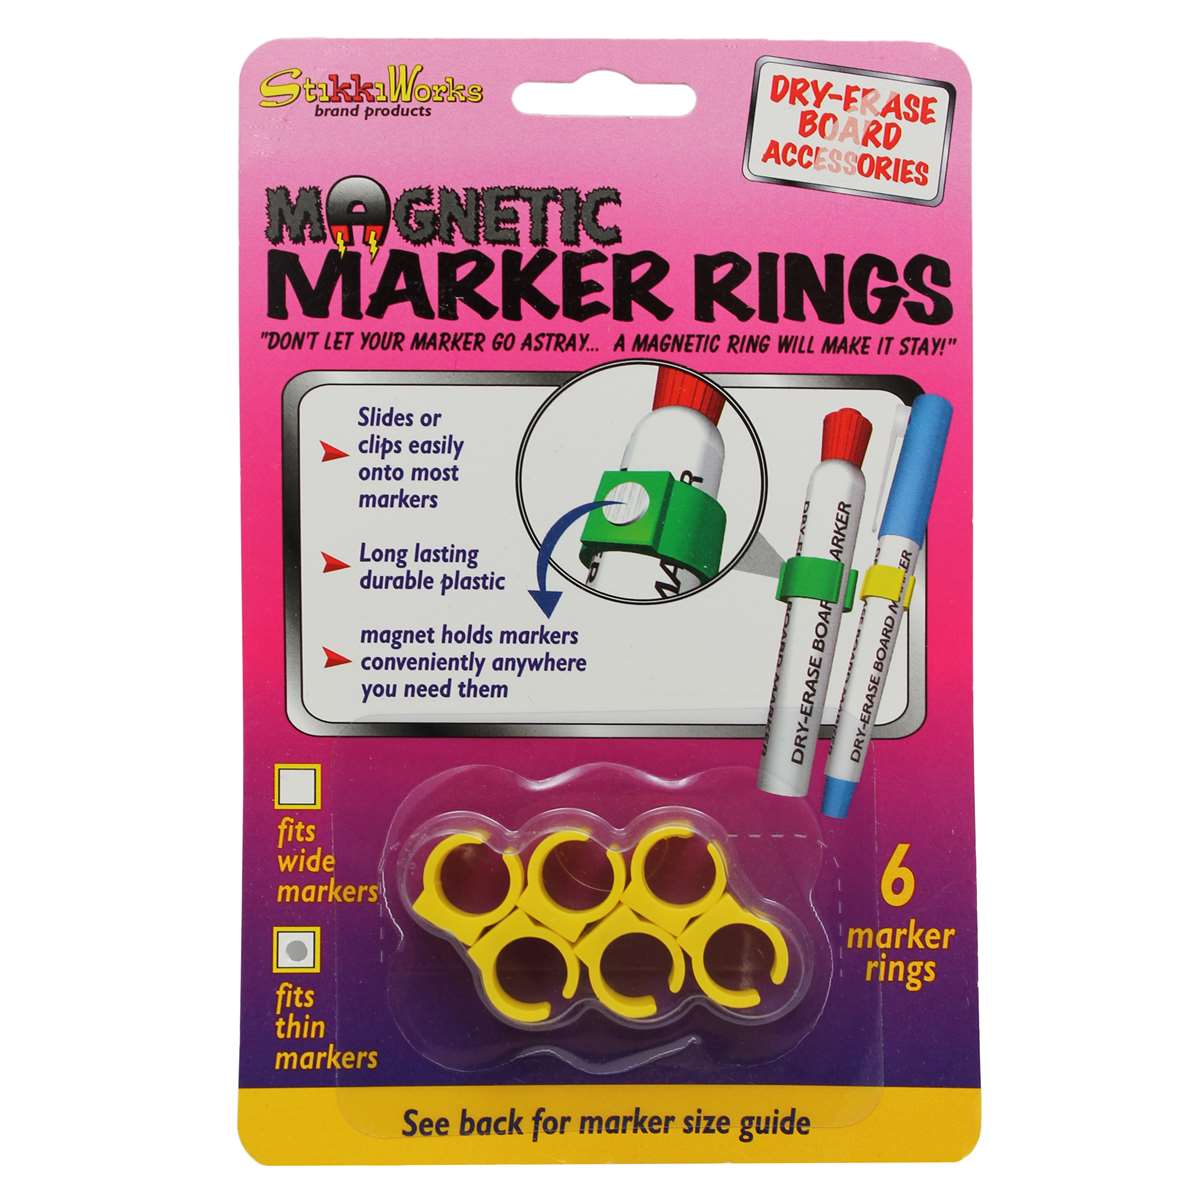 Magnetic Marker Rings: Fits Thin Barrel Markers, 6 Pack by The Stikkiworks:  White Board Eraser & Accessories